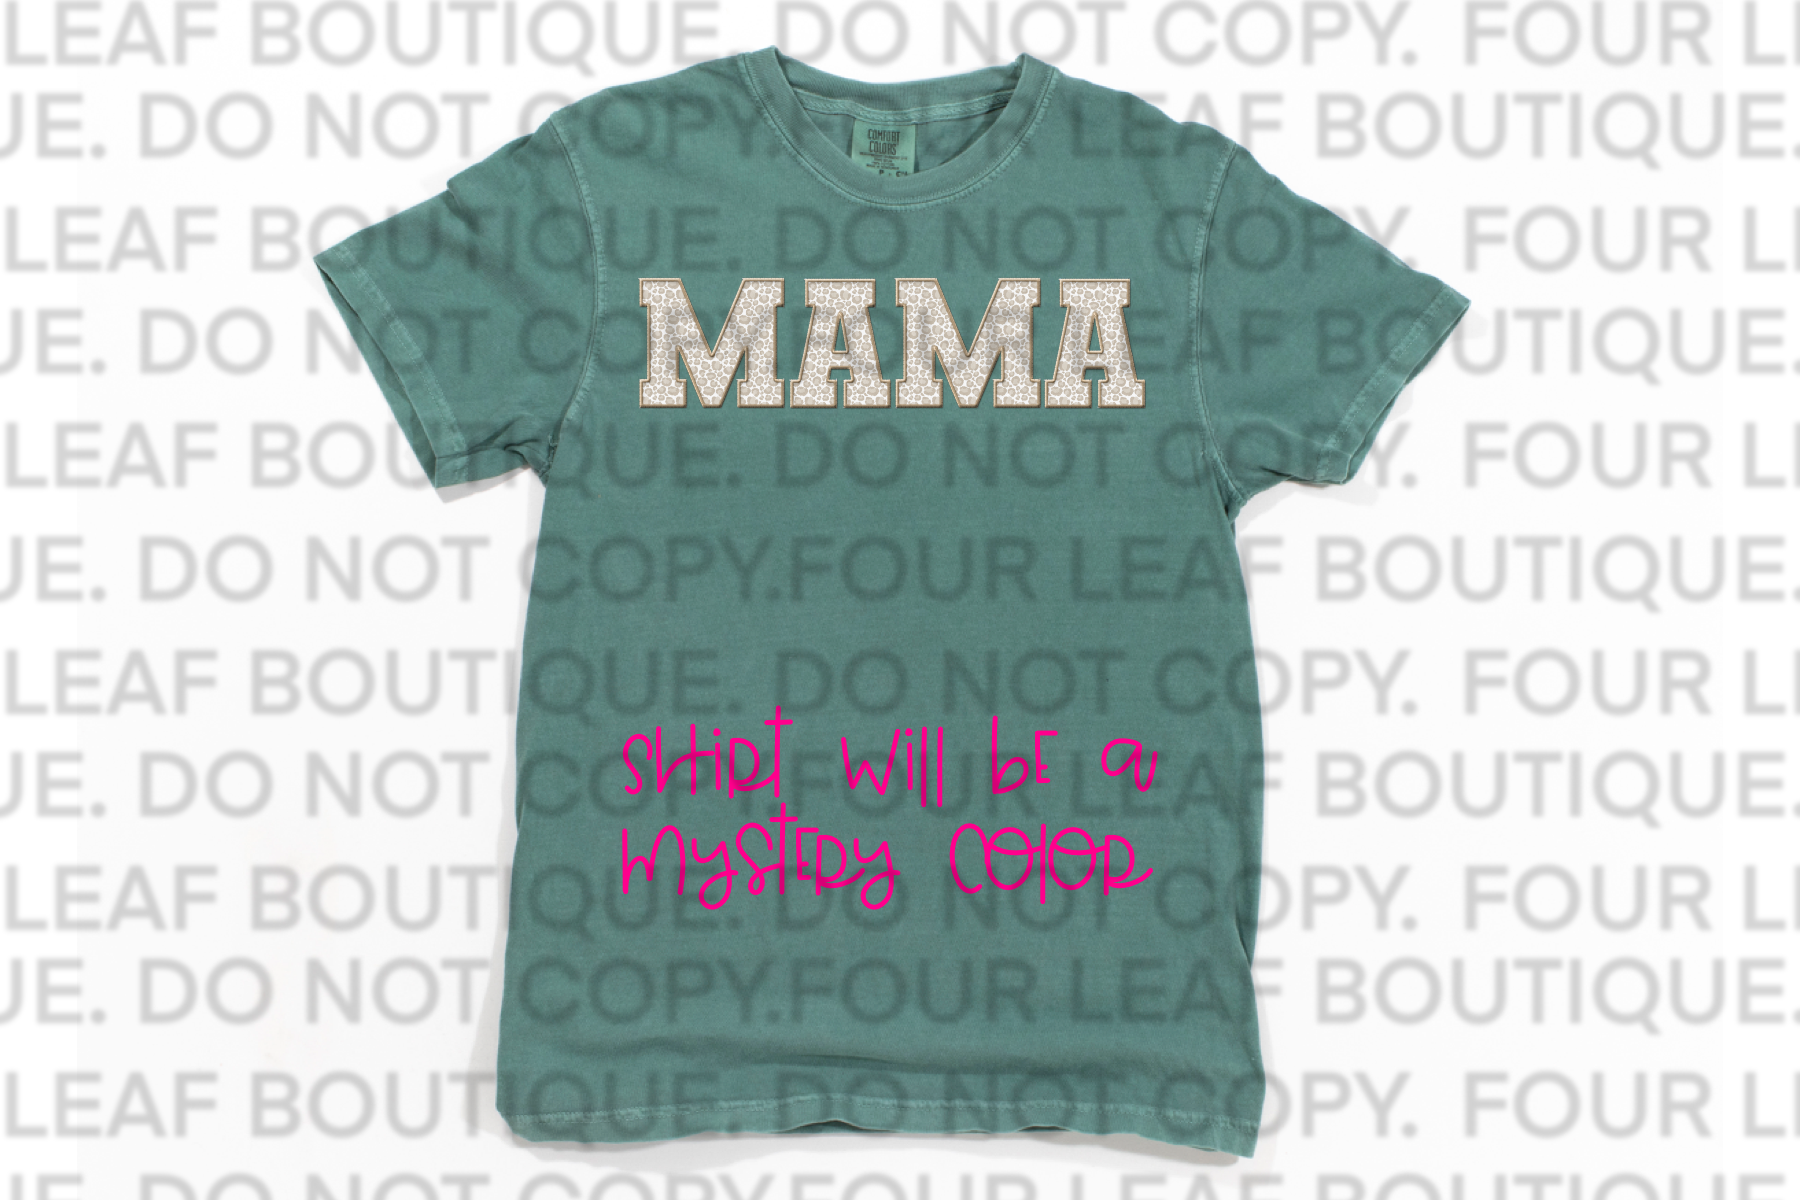 MAMA. FAUX EMBROIDERY. MYSTERY COLOR SHIRT